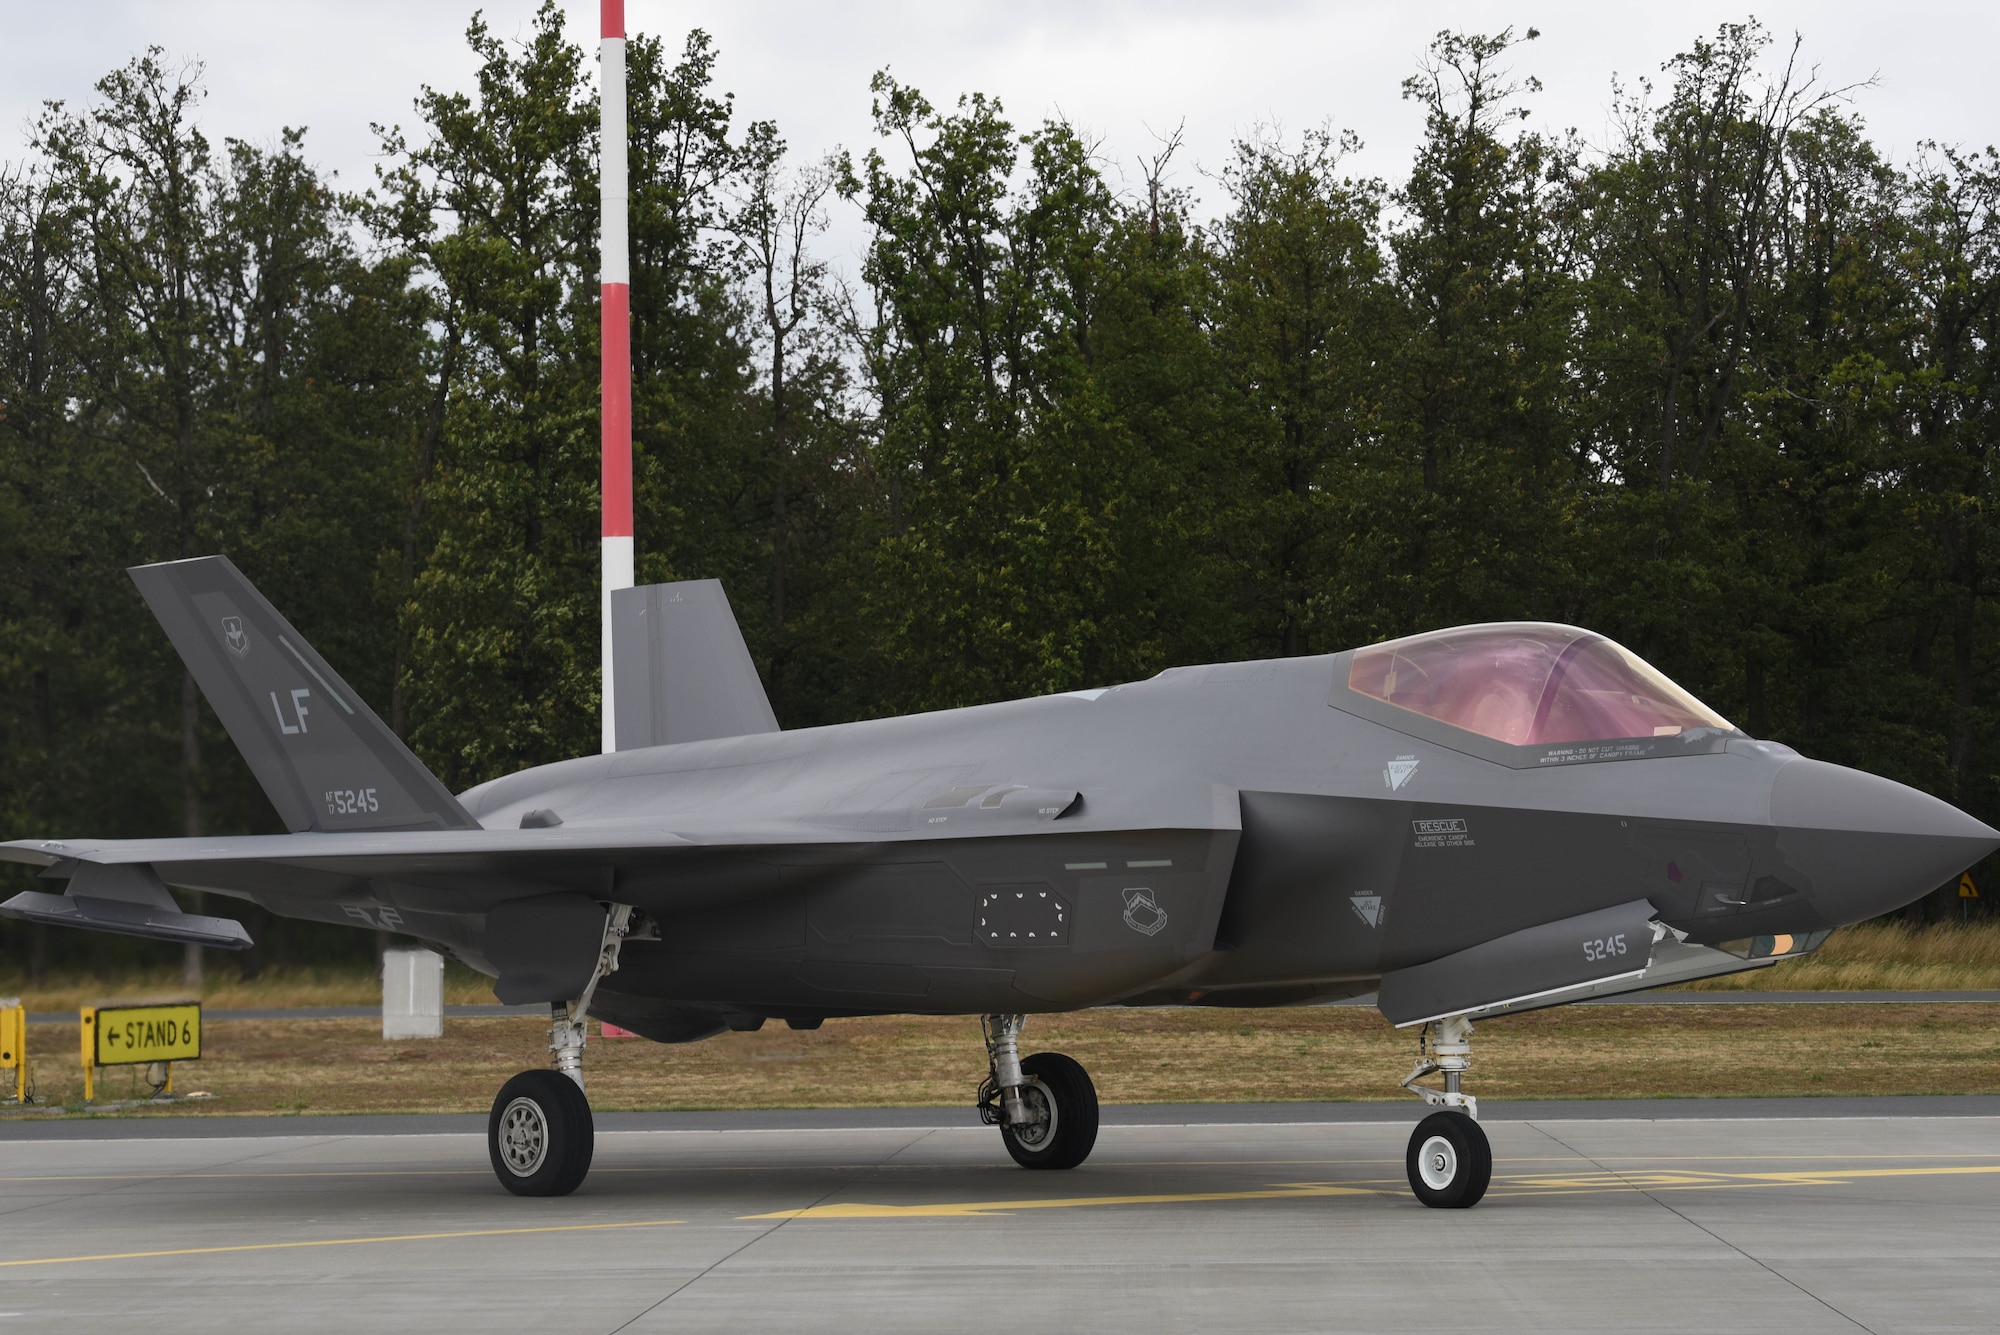 A U.S. Air Force F-35A Lightning II aircraft sits on a runway during Operation Rapid Forge on Powidz Air Base, Poland, July, 16, 2019. This is the first time that an U.S. Air Force F-35A Lightning II aircraft has landed in Poland. Rapid Forge is a U.S. Air Forces in Europe-led mission to enhance readiness and test the ability to function at locations other than the main airbases.